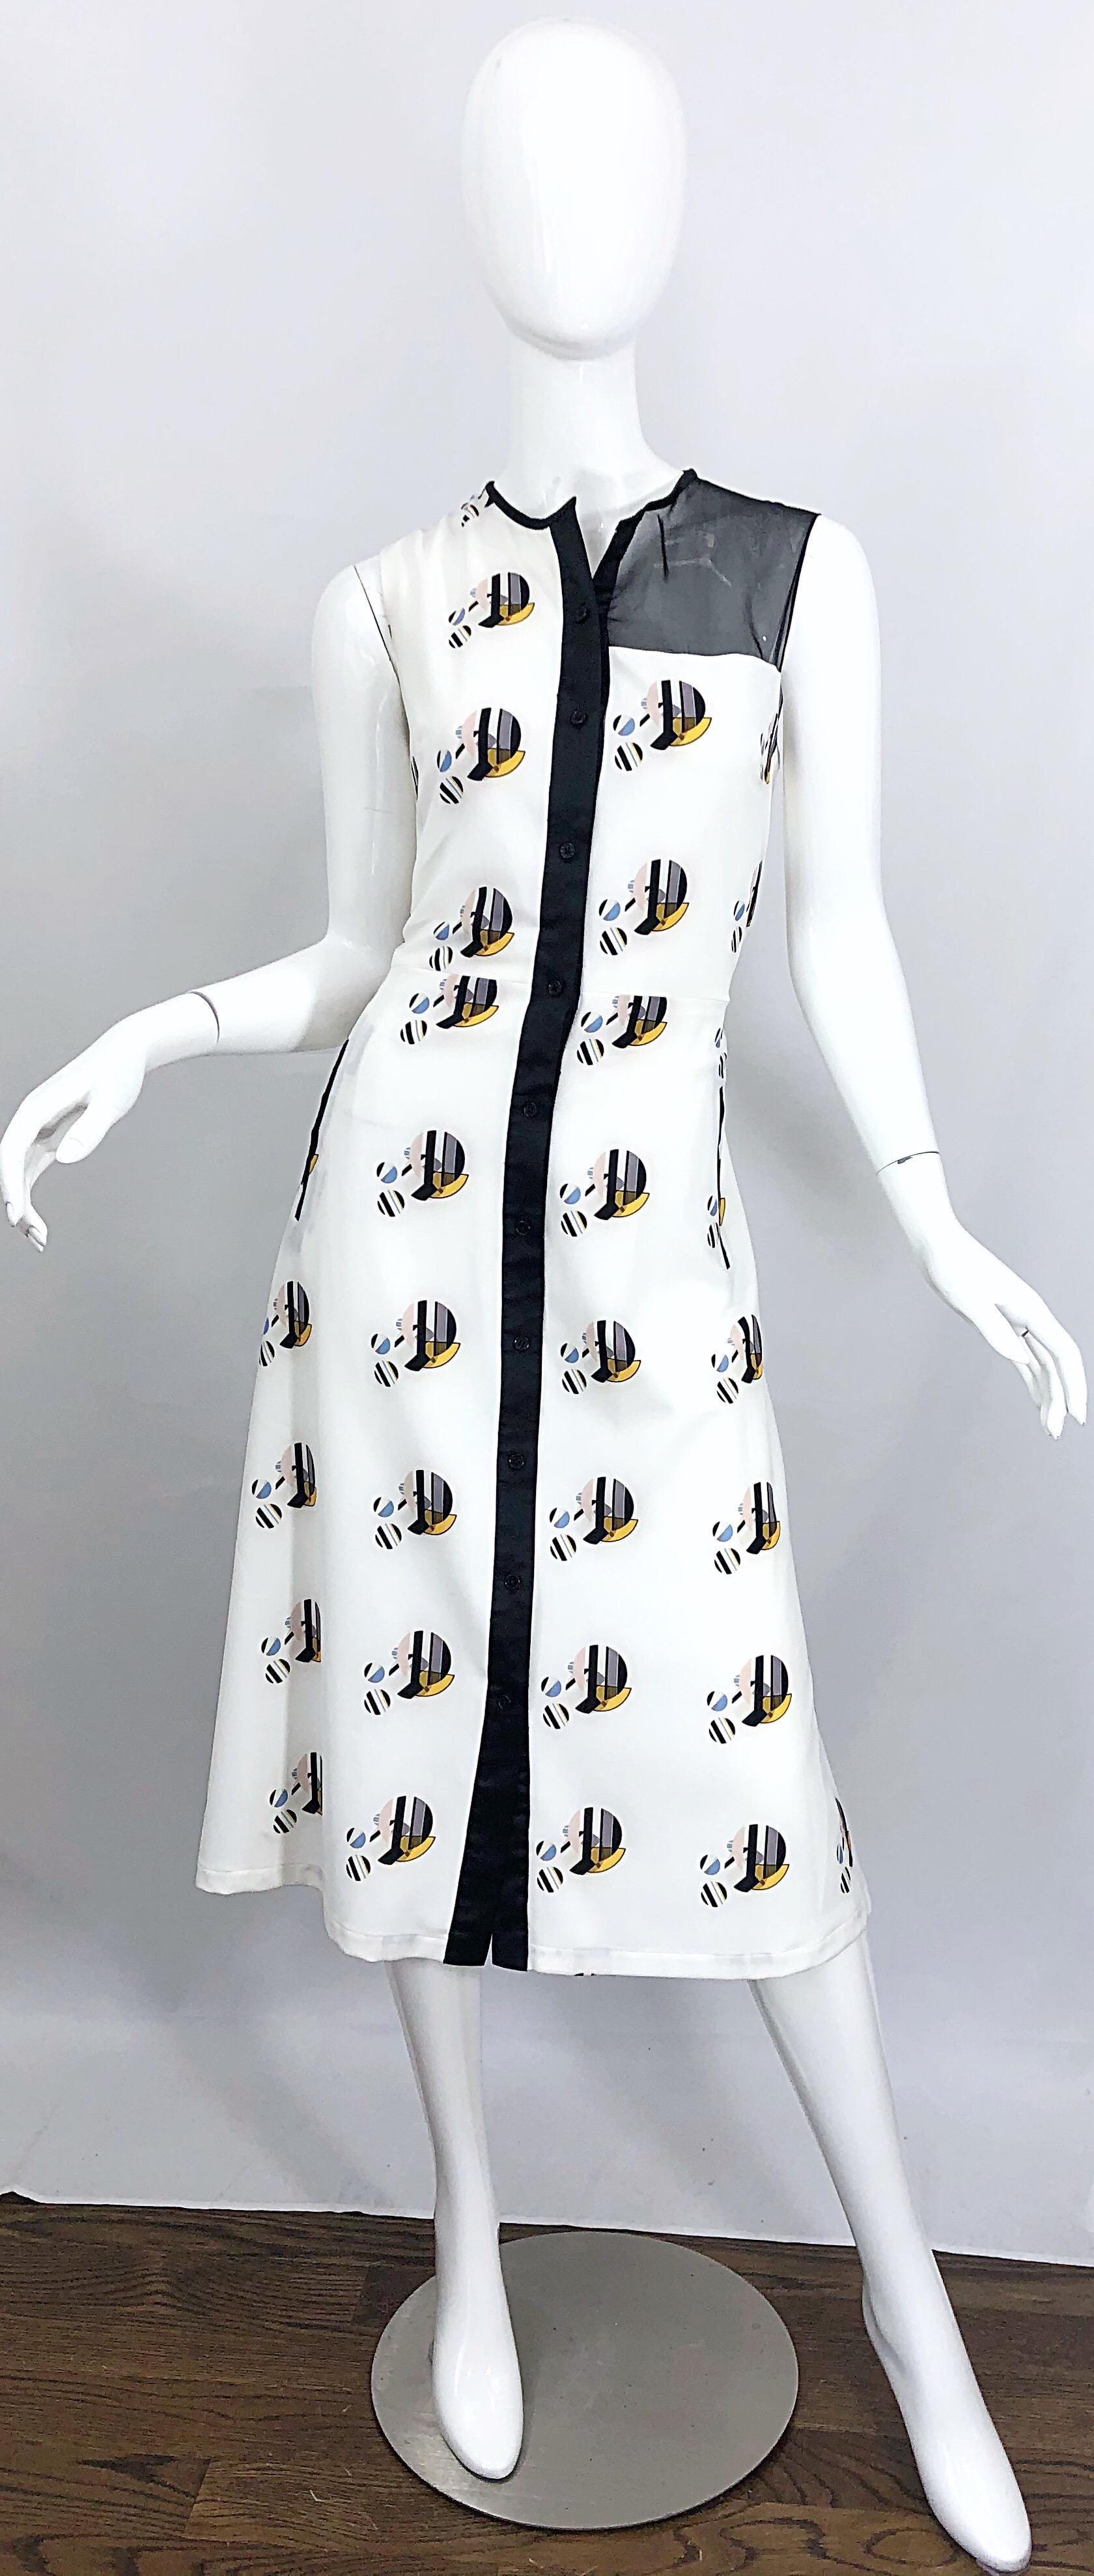 Chic brand new BIBHU MOHAPATRA abstract printed silk sleeveless shirt dress! Features a crisp white silk with abstract circle shapes in vibrant colors of blue, yellow, taupe and black. Black sheer panel at left shoulder and top back. Hidden buttons